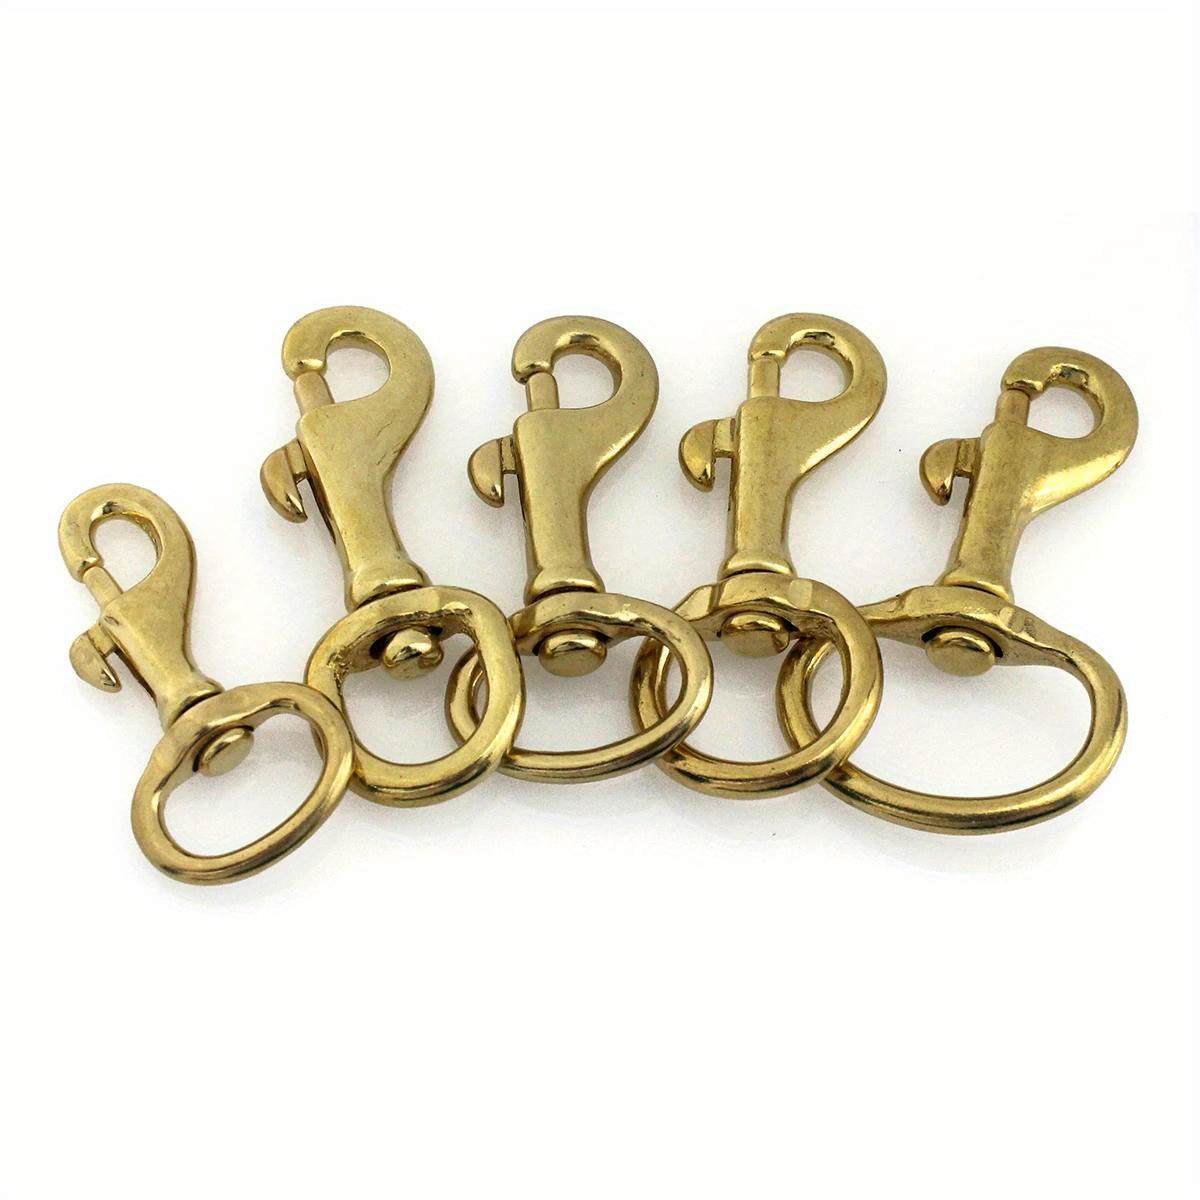 10pcs Metal Snap Hook Swivel Eye Trigger Clip Clasp For Leather Craft Bag  Strap